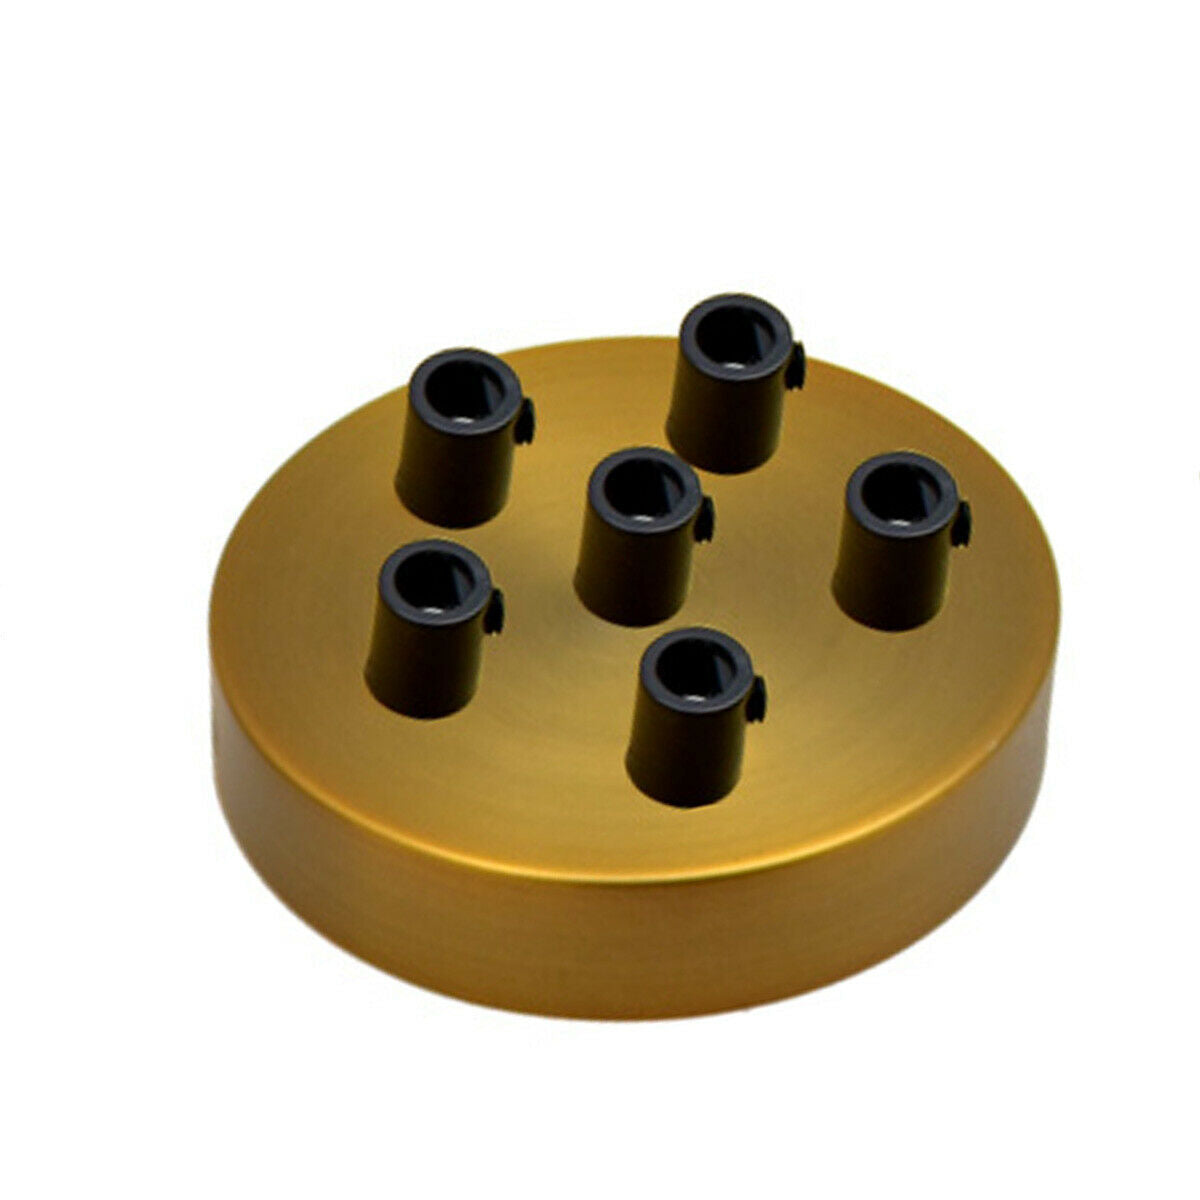 6 Outlet Yellow Brass Metal Ceiling Rose 120x25mm - Shop for LED lights - Transformers - Lampshades - Holders | LEDSone UK